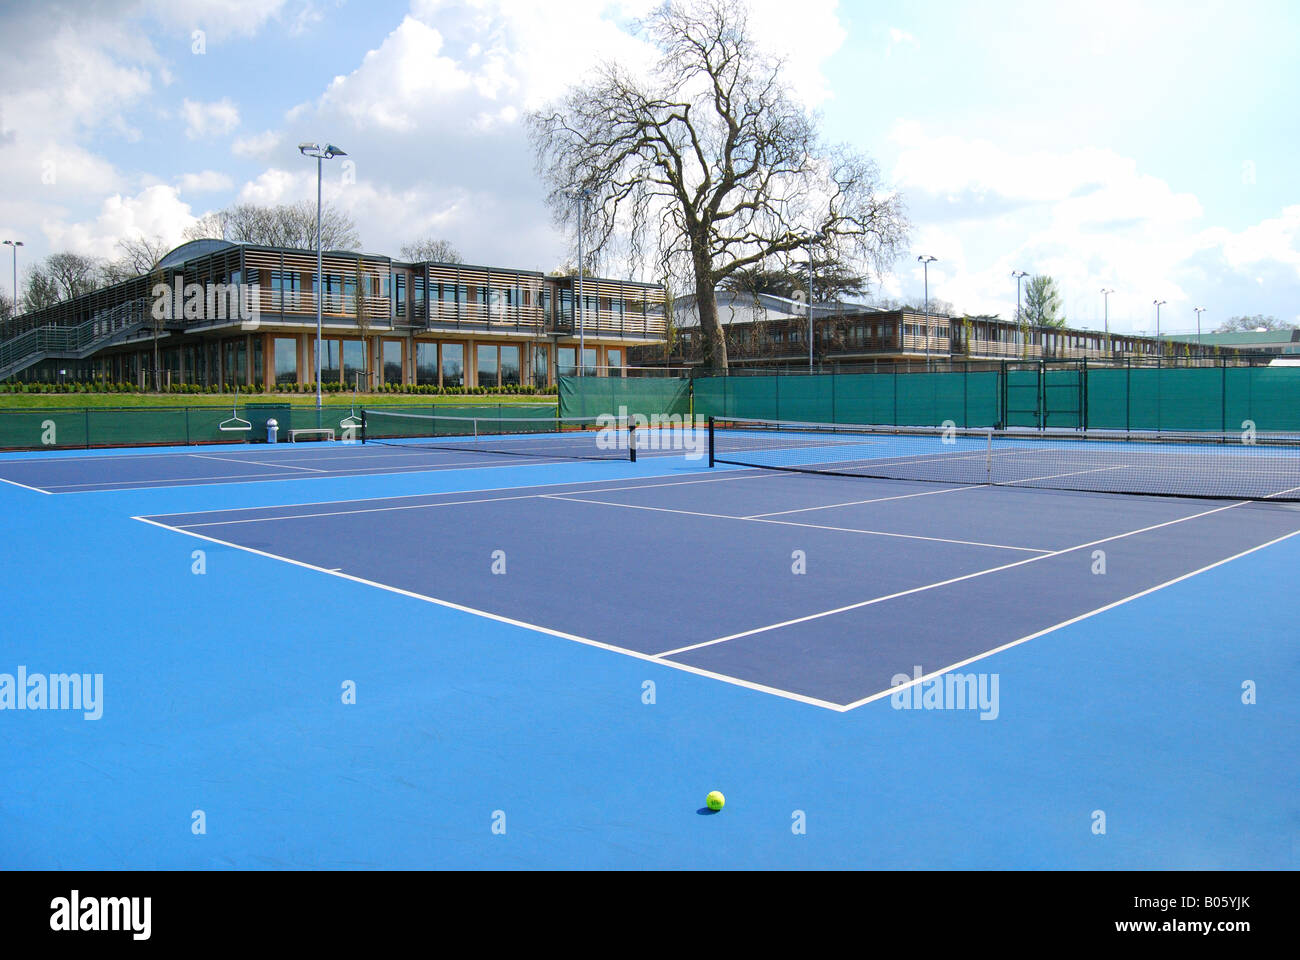 National Tennis Centre Roehampton High Resolution Stock Photography and  Images - Alamy